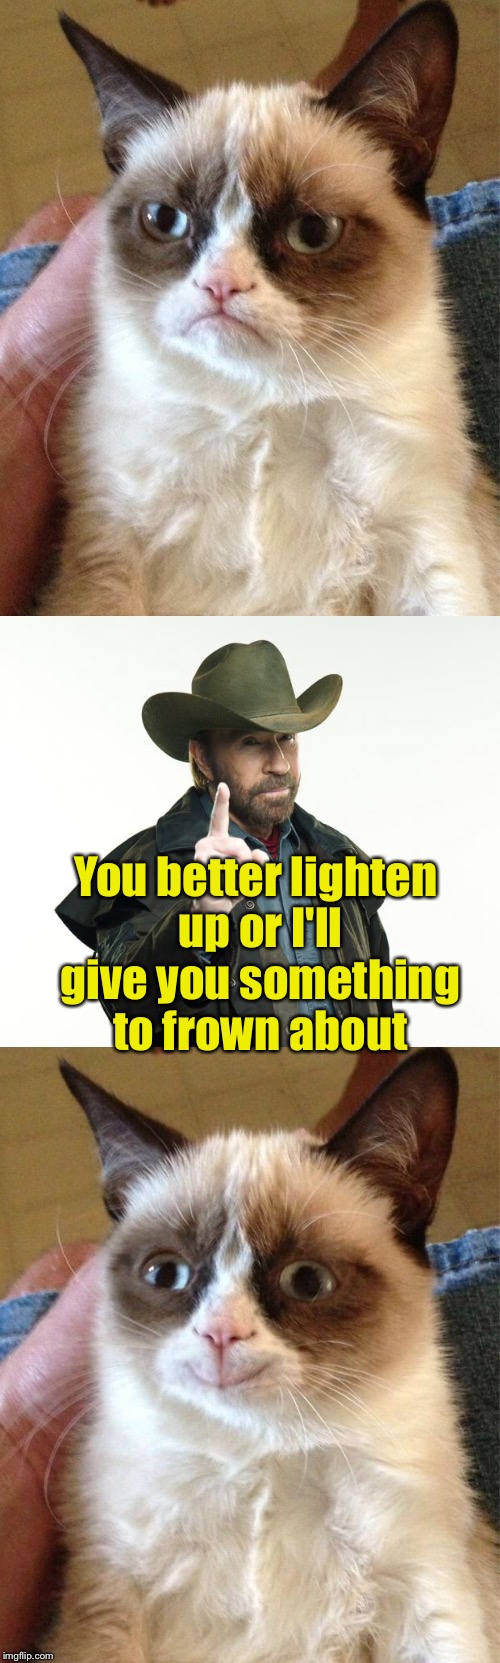 It's all a matter of perspective (Chuck Norris Week) | You better lighten up or I'll give you something to frown about | image tagged in chuck norris week,grumpy cat | made w/ Imgflip meme maker